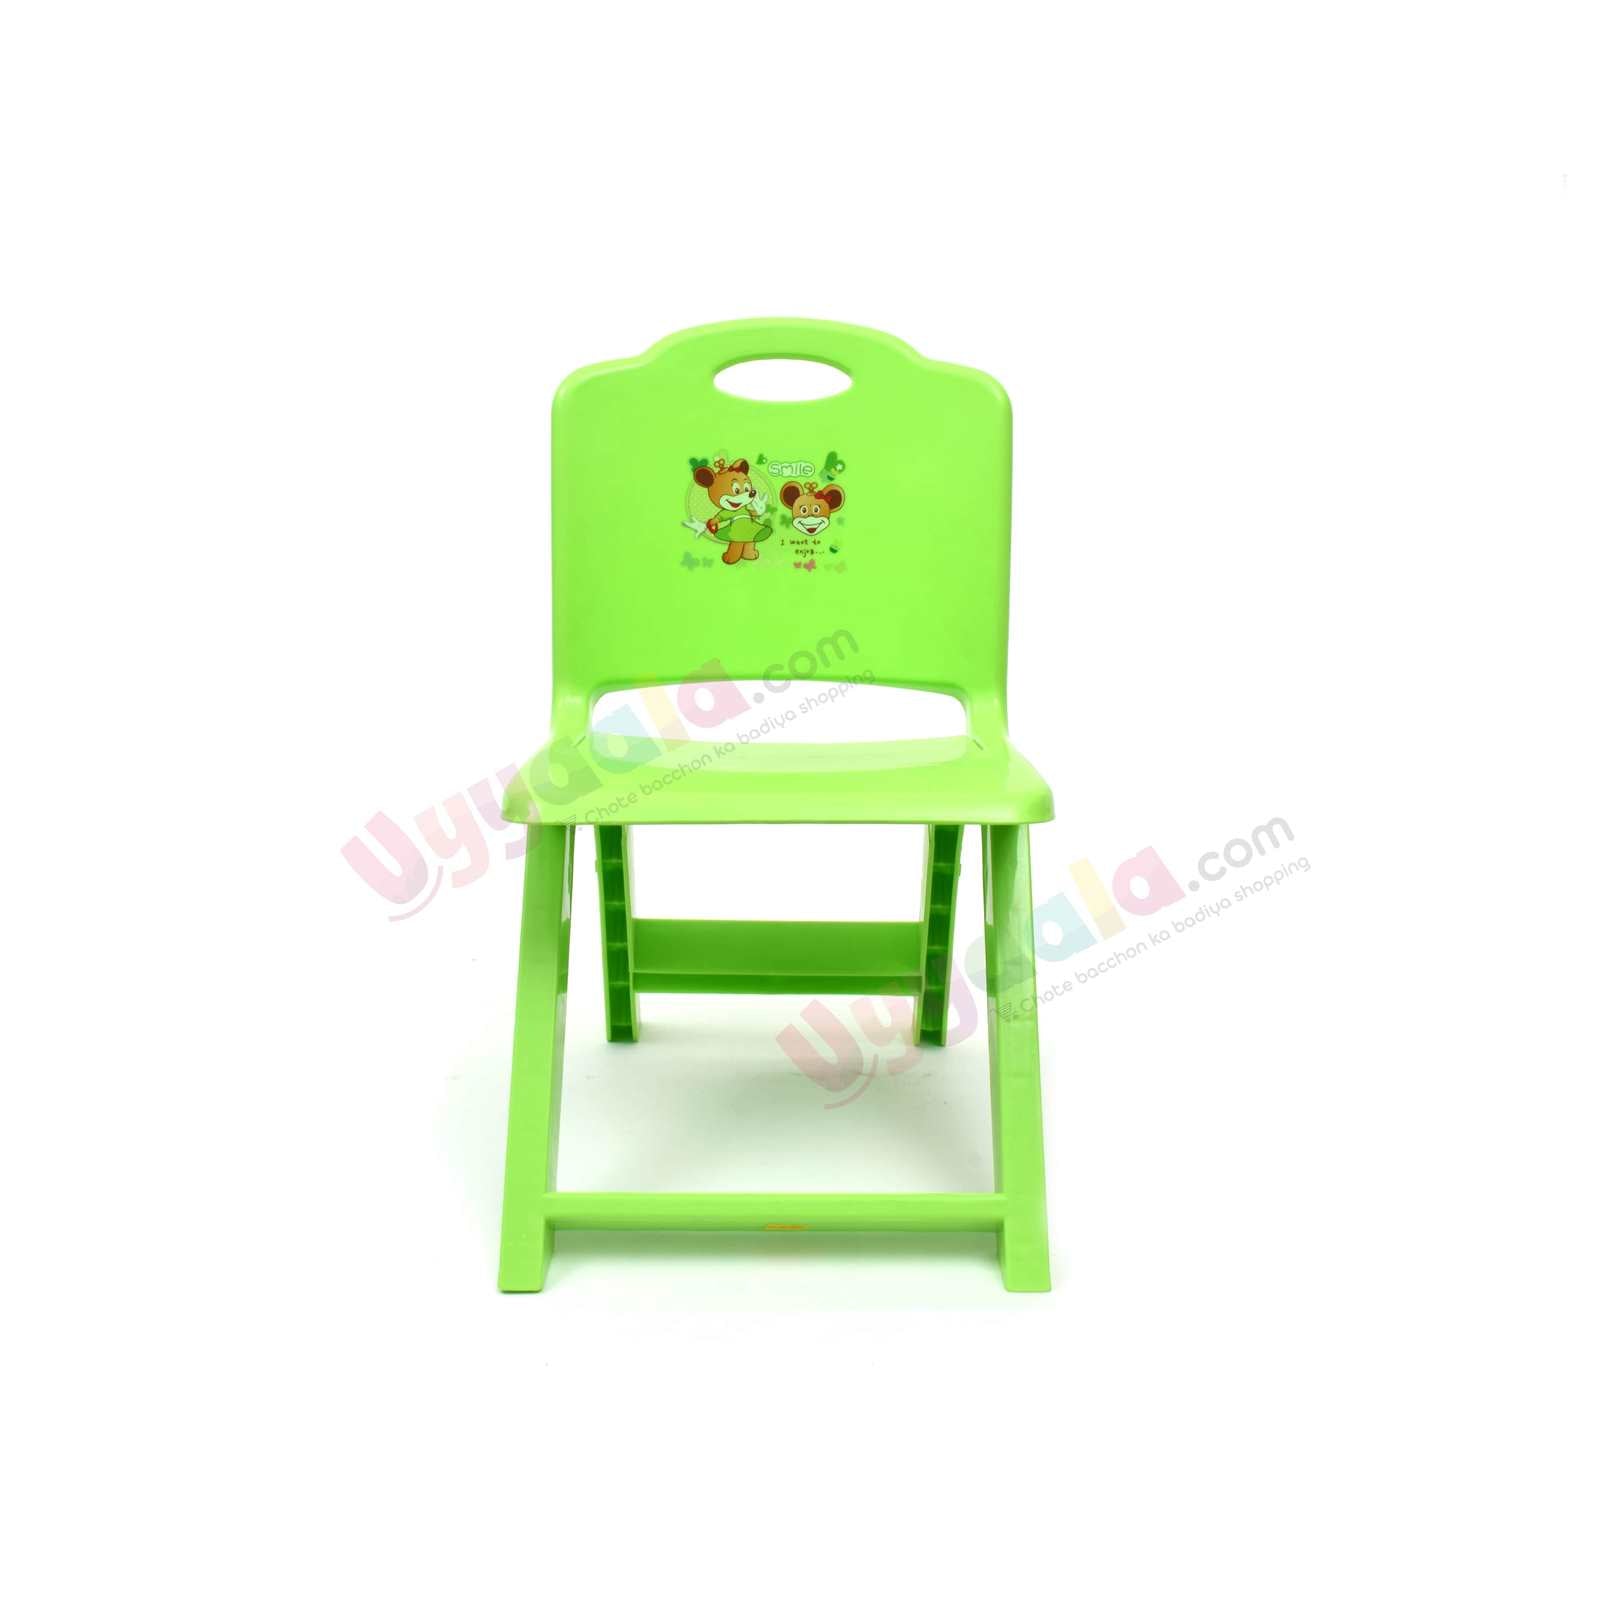 SMILE folding chair for kids micky mouse print - Green